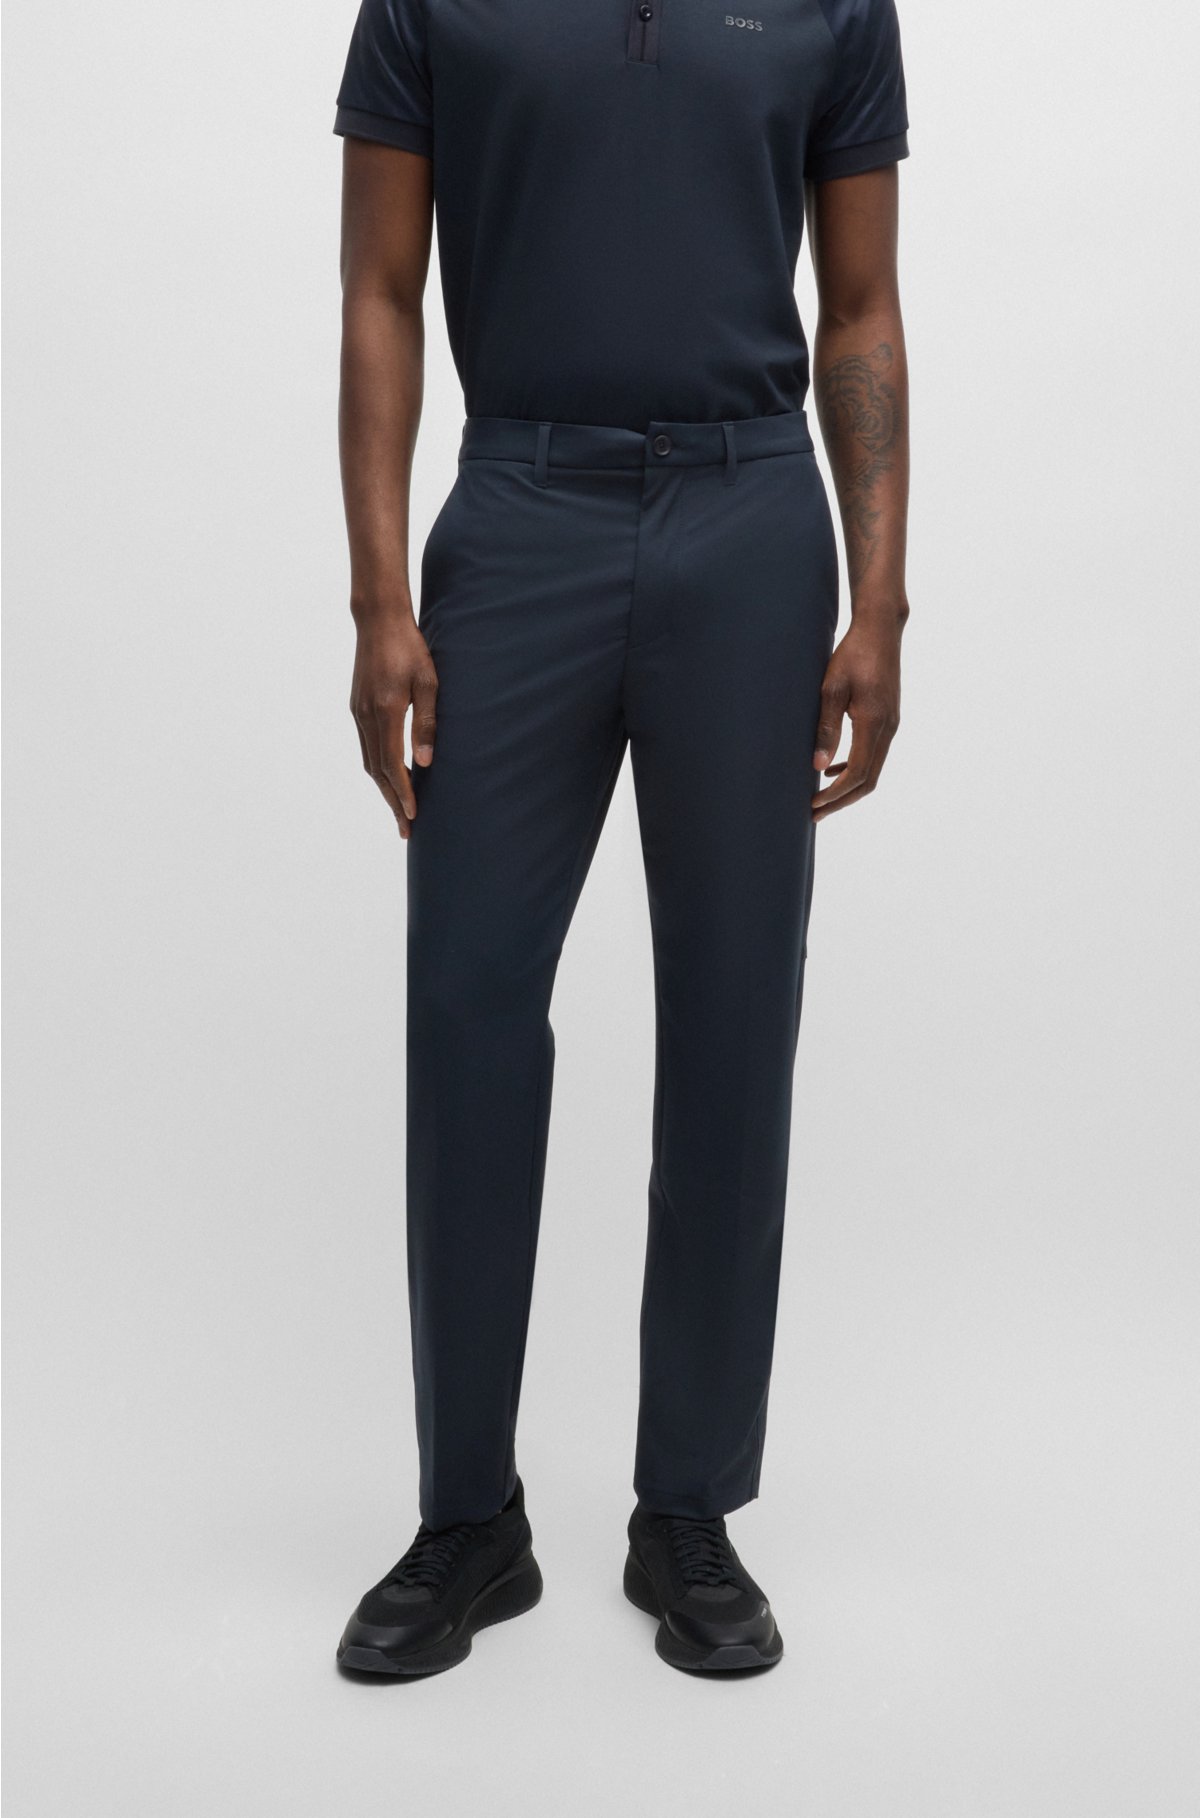 WAYF Contrast Waistband Trousers | Anthropologie Singapore - Women's  Clothing, Accessories & Home